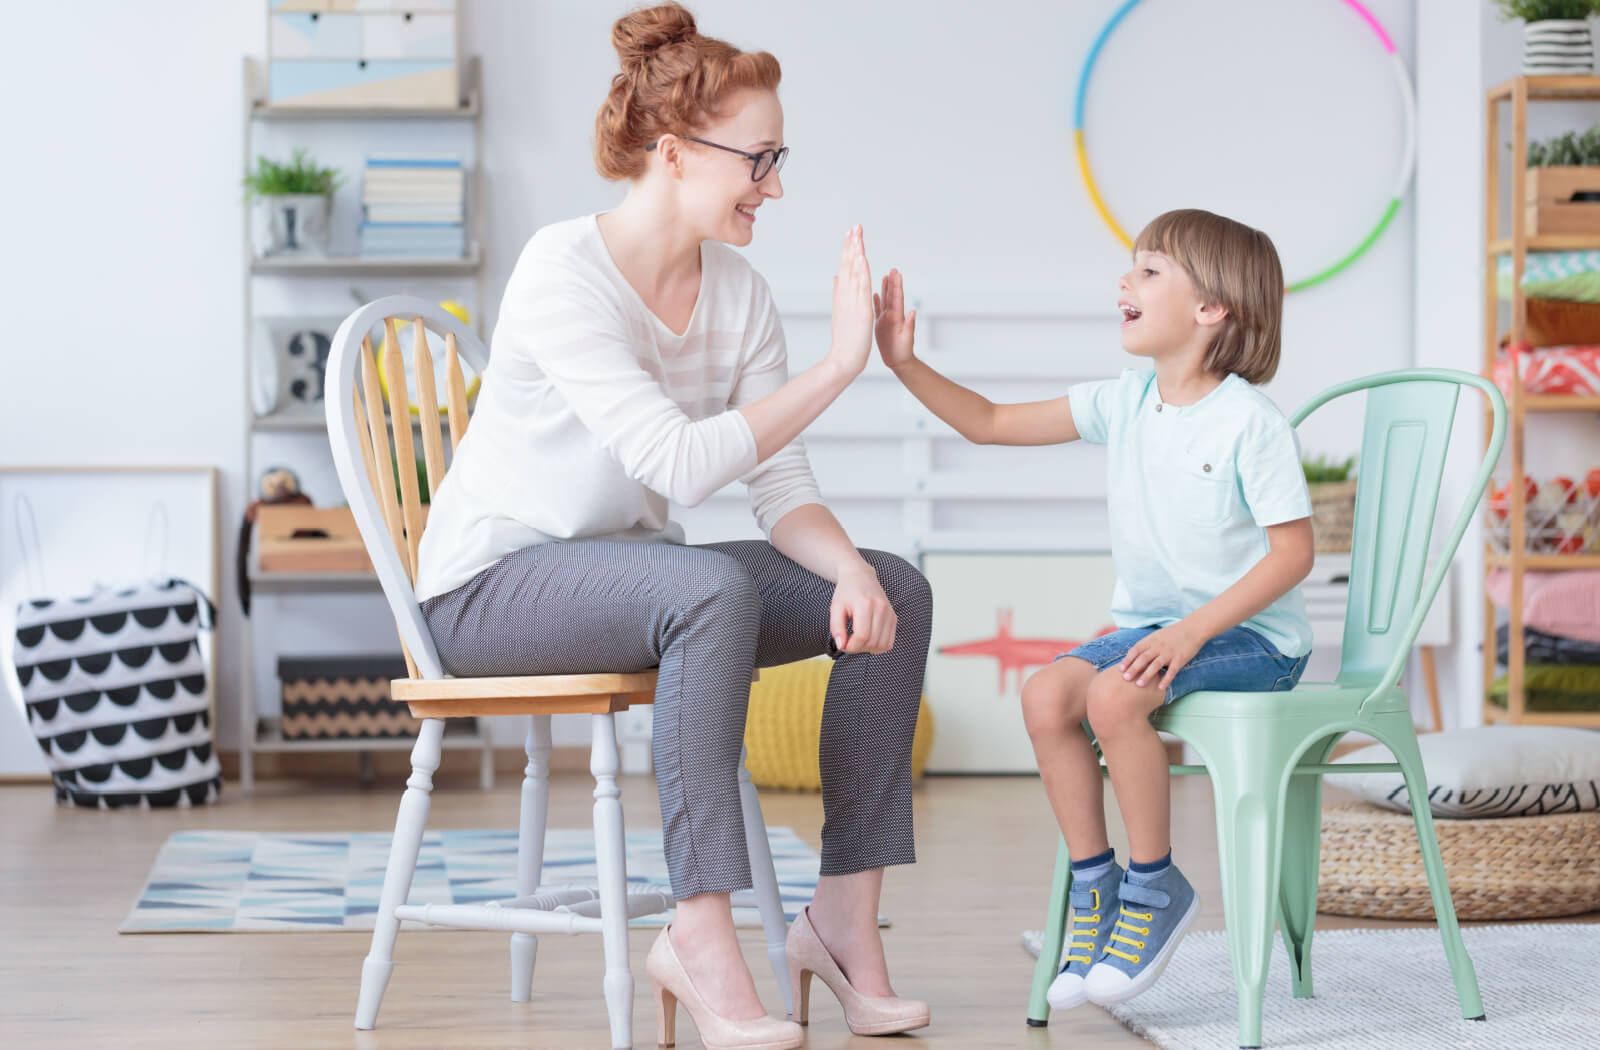 Young boy and pediatric optometrist having fun during conversation in colorful room with toys